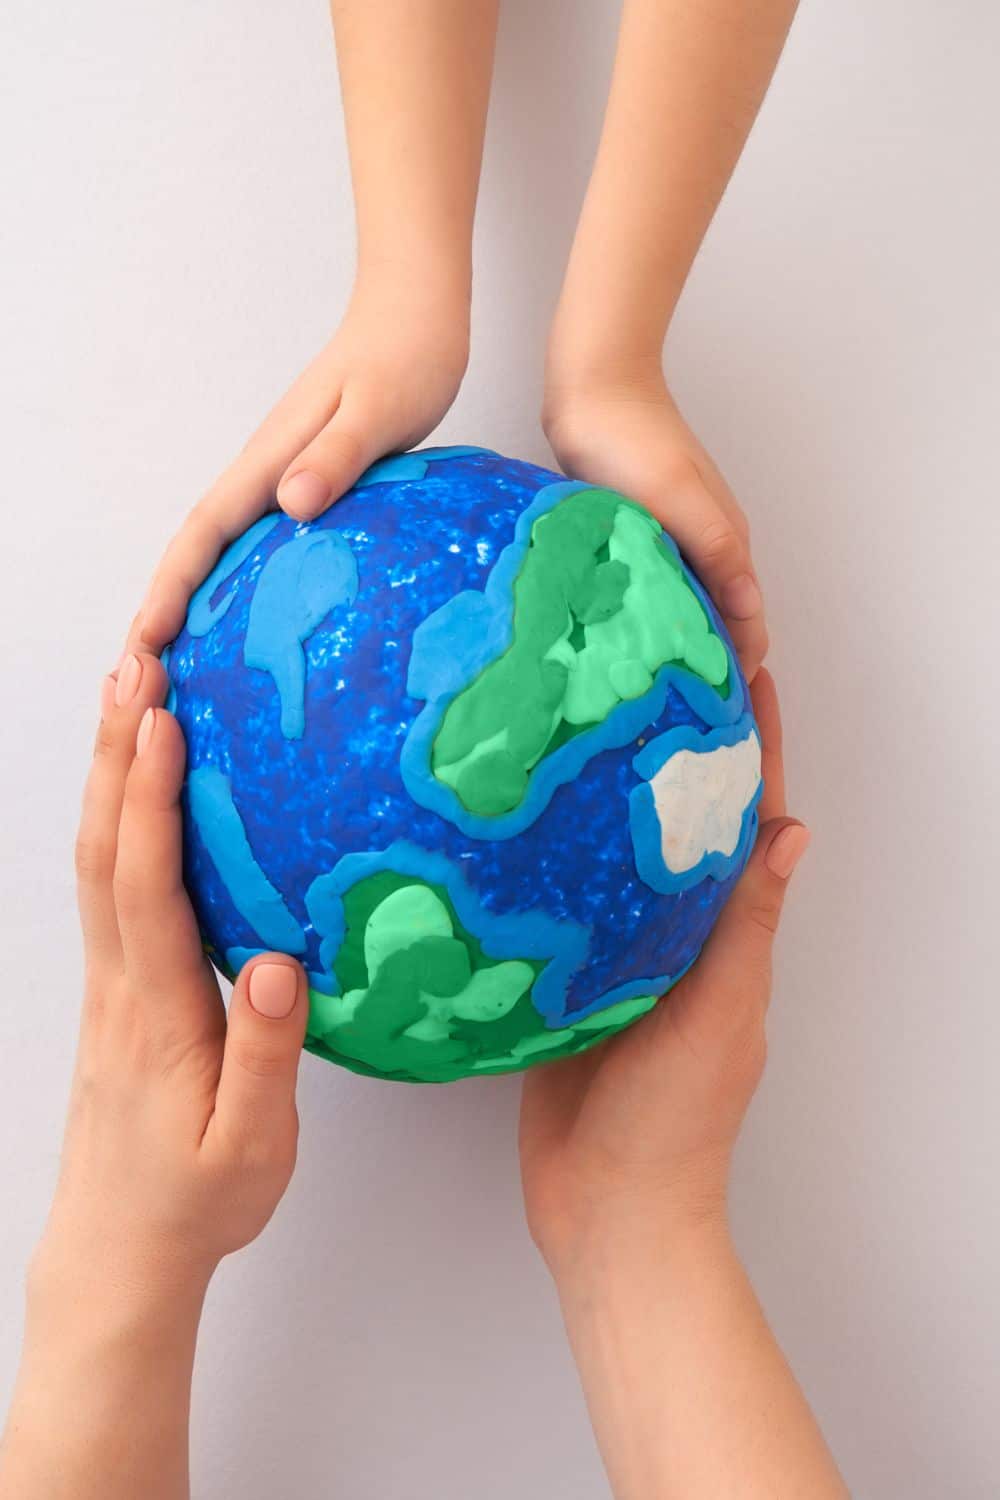 hands holding a model of the earth